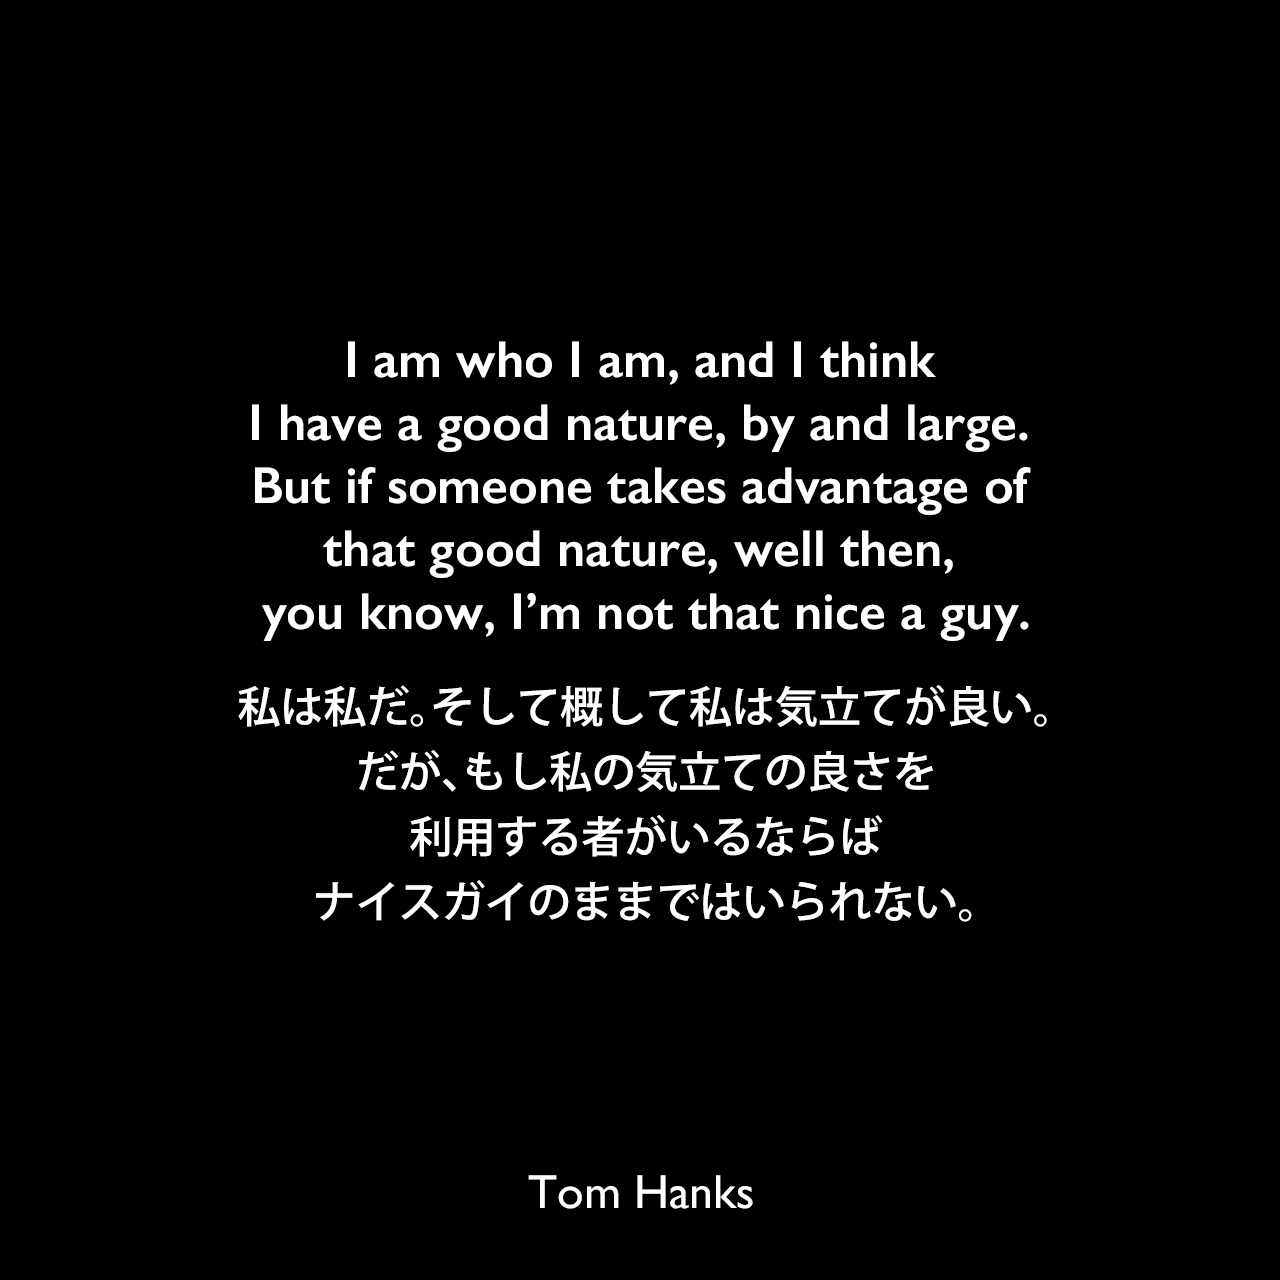 I am who I am, and I think I have a good nature, by and large. But if someone takes advantage of that good nature, well then, you know, I’m not that nice a guy.私は私だ。そして概して私は気立てが良い。だが、もし私の気立ての良さを利用する者がいるならば、ナイスガイのままではいられない。Tom Hanks